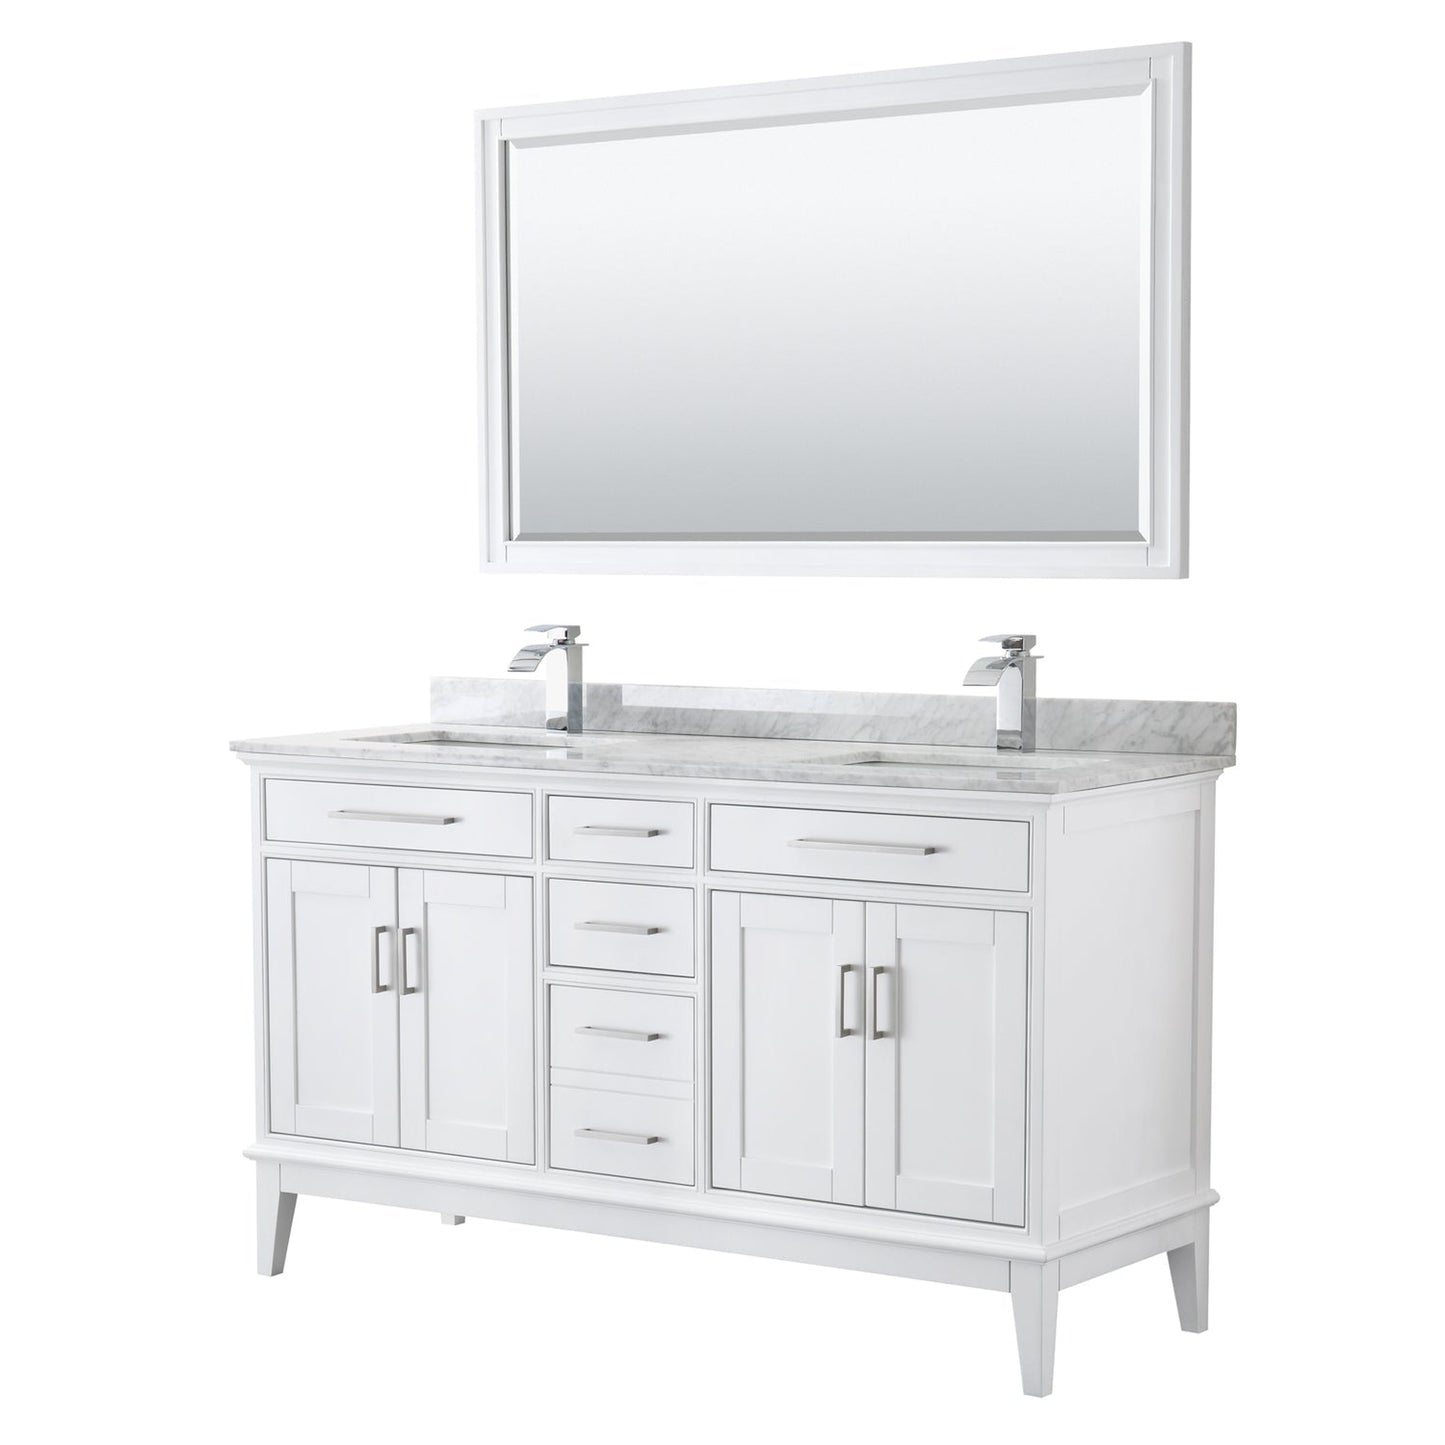 Wyndham Collection Margate 60" Double Bathroom White Vanity With White Carrara Marble Countertop, Undermount Square Sink And 56" Mirror